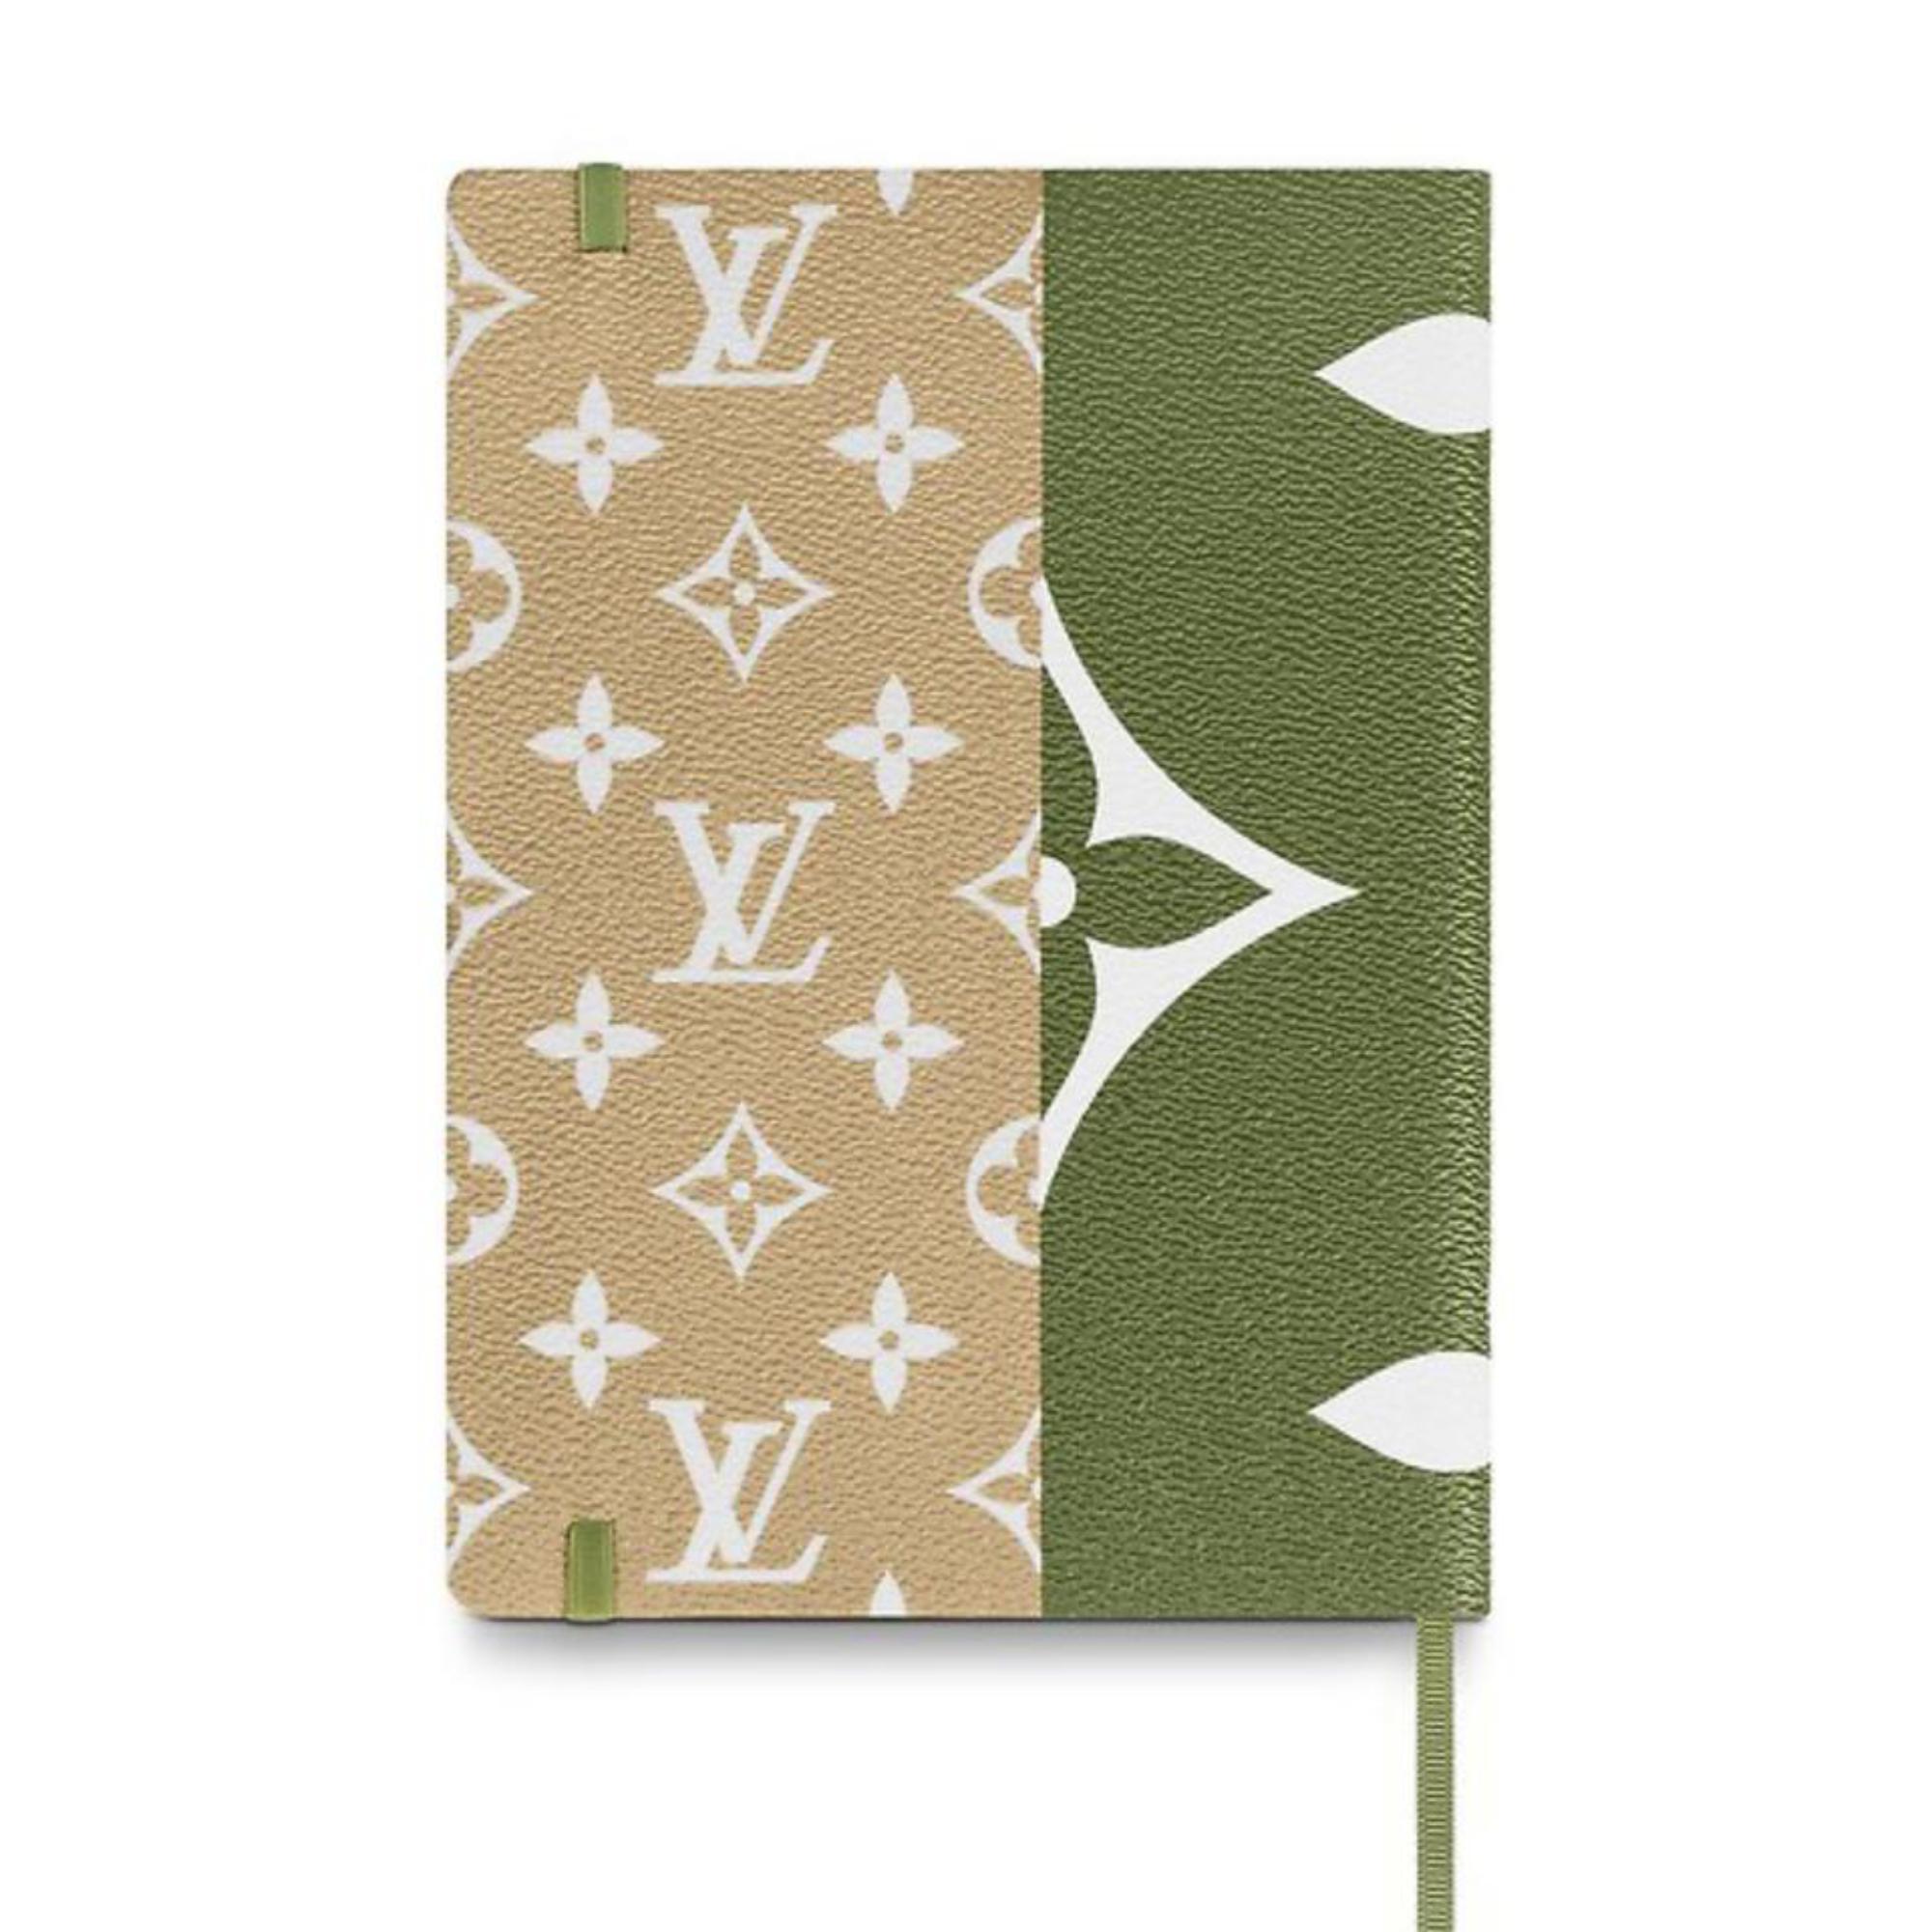 BRAND NEW IN BOX
(10/10 or NWT)
Includes Box and Copy of Receipt
The Monogram Giant Gustave Notebook MM fuses pop art colors with Louis Vuitton signature touches. Monogram Flowers adorn the corners of the canvas notebook for a feminine twist, while